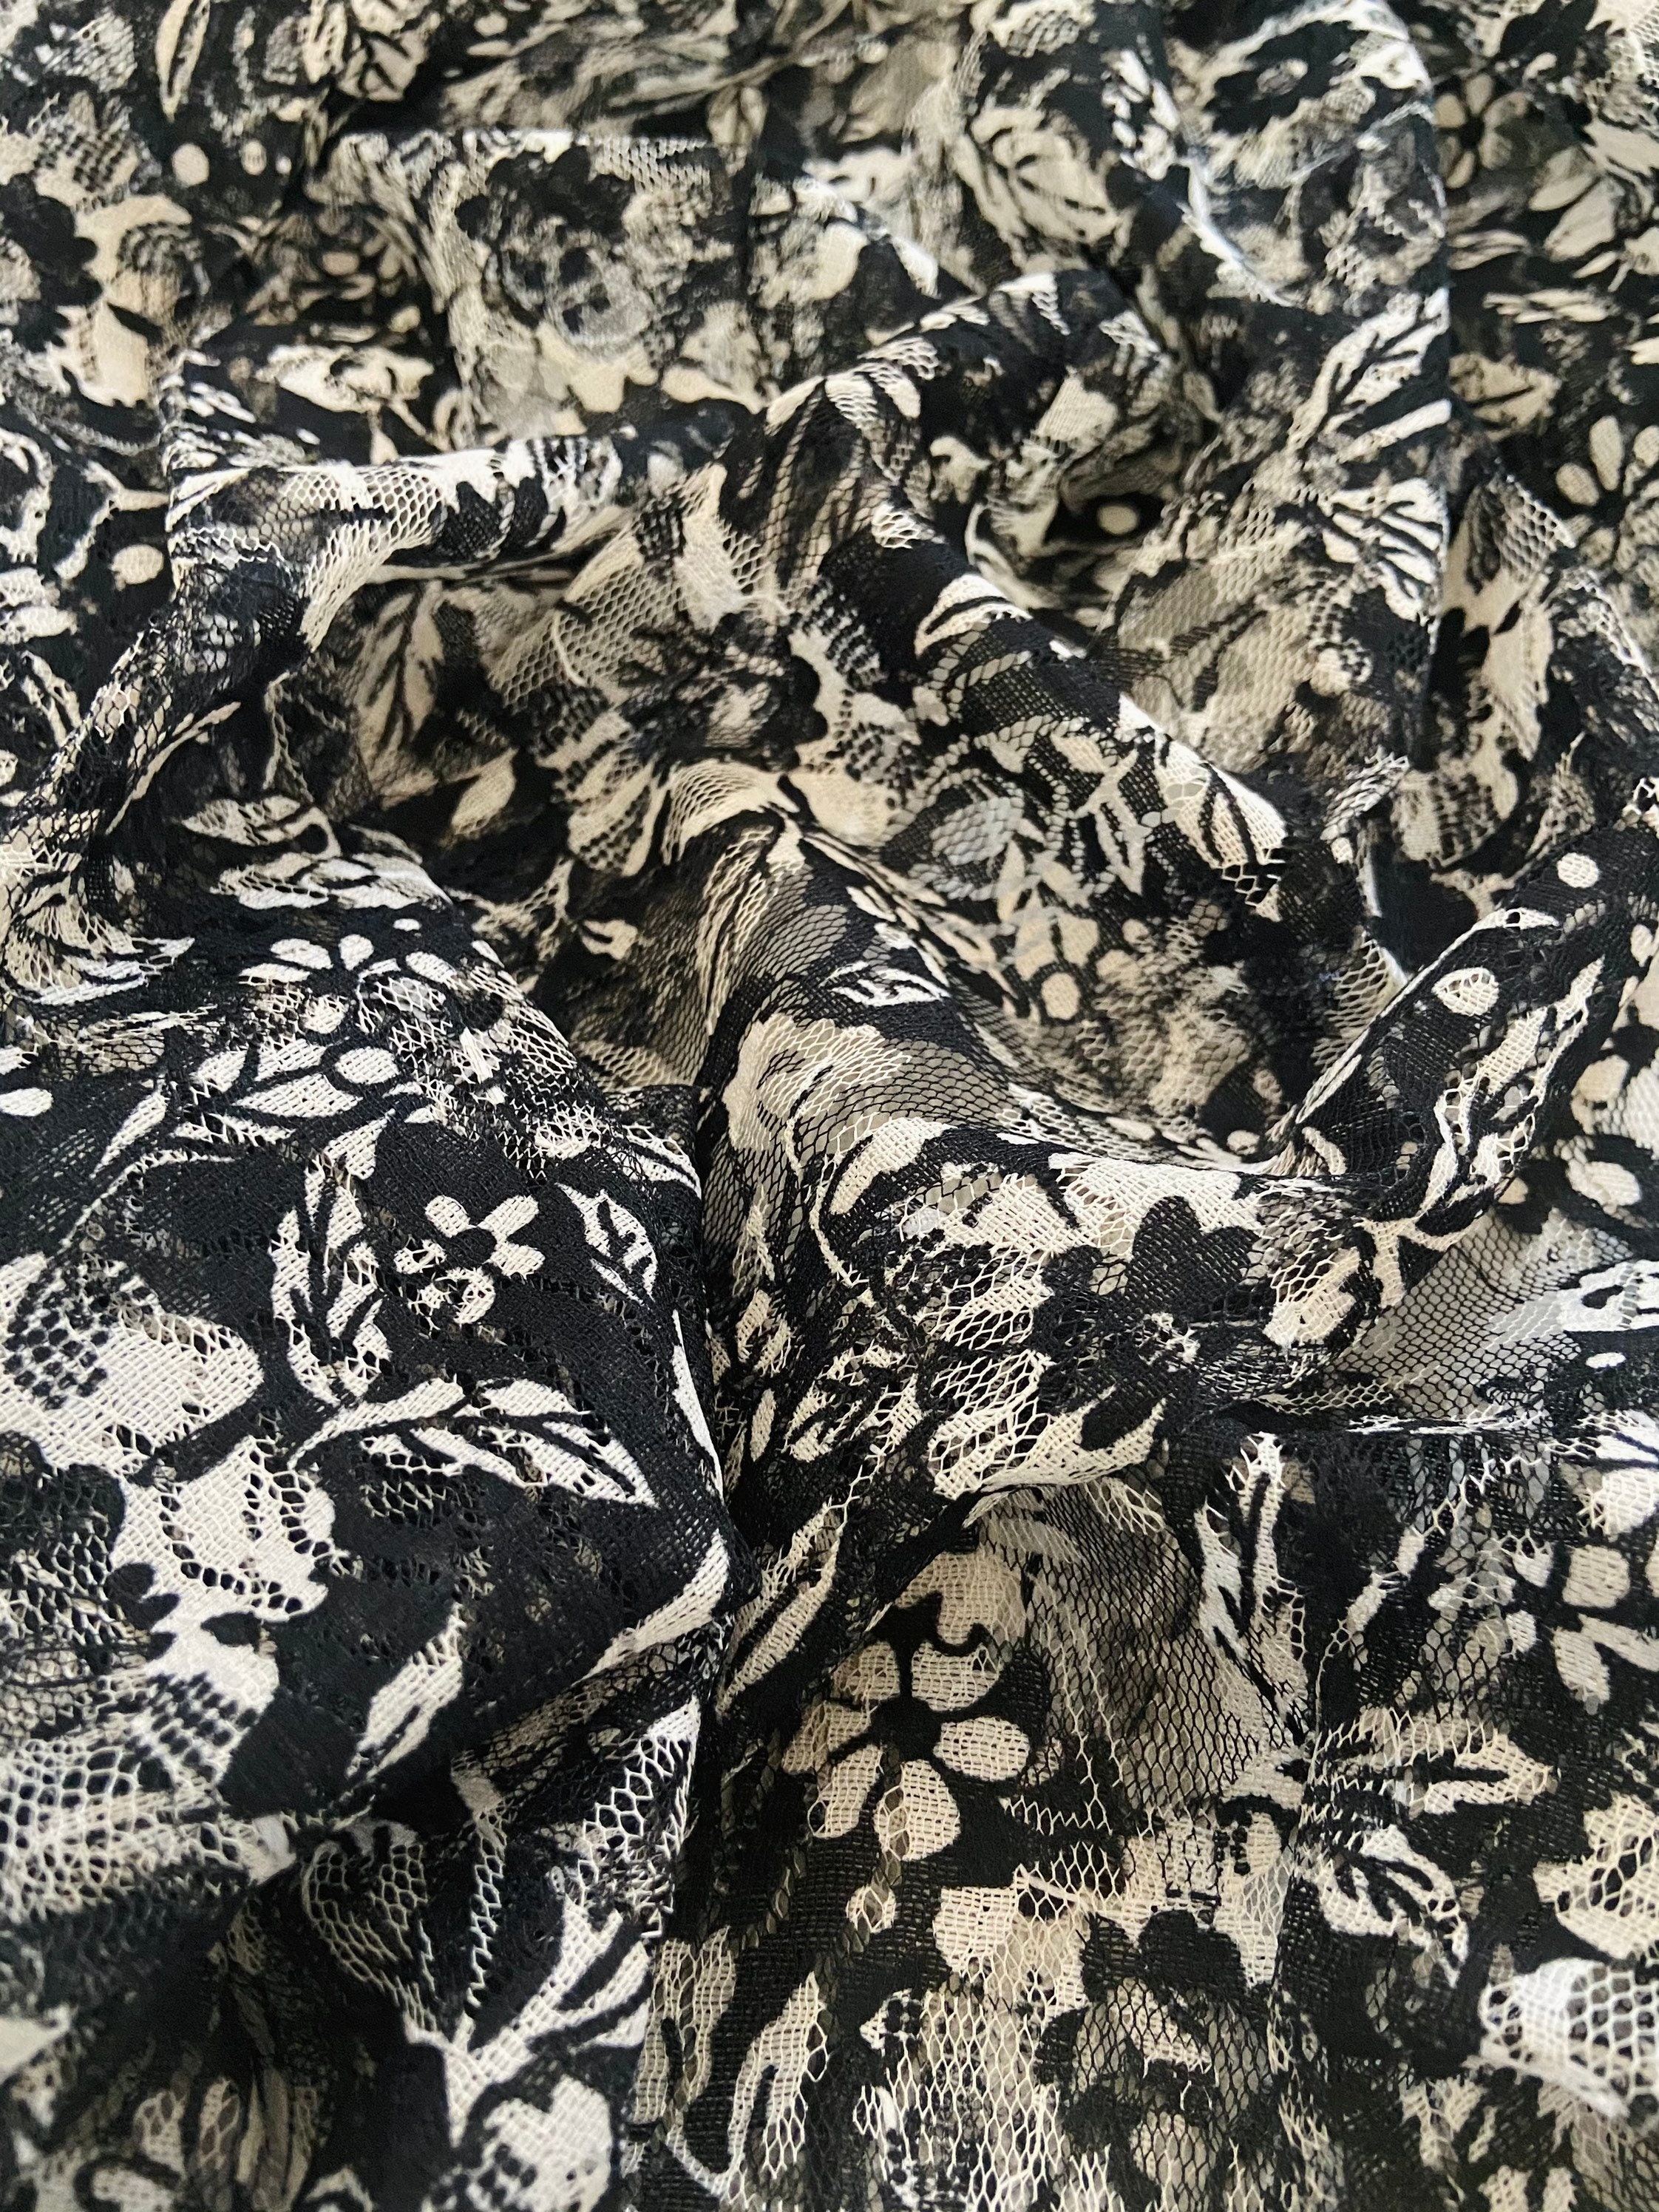 5 Yards Sheer Floral Printed Lace Fabric Black and White - Etsy